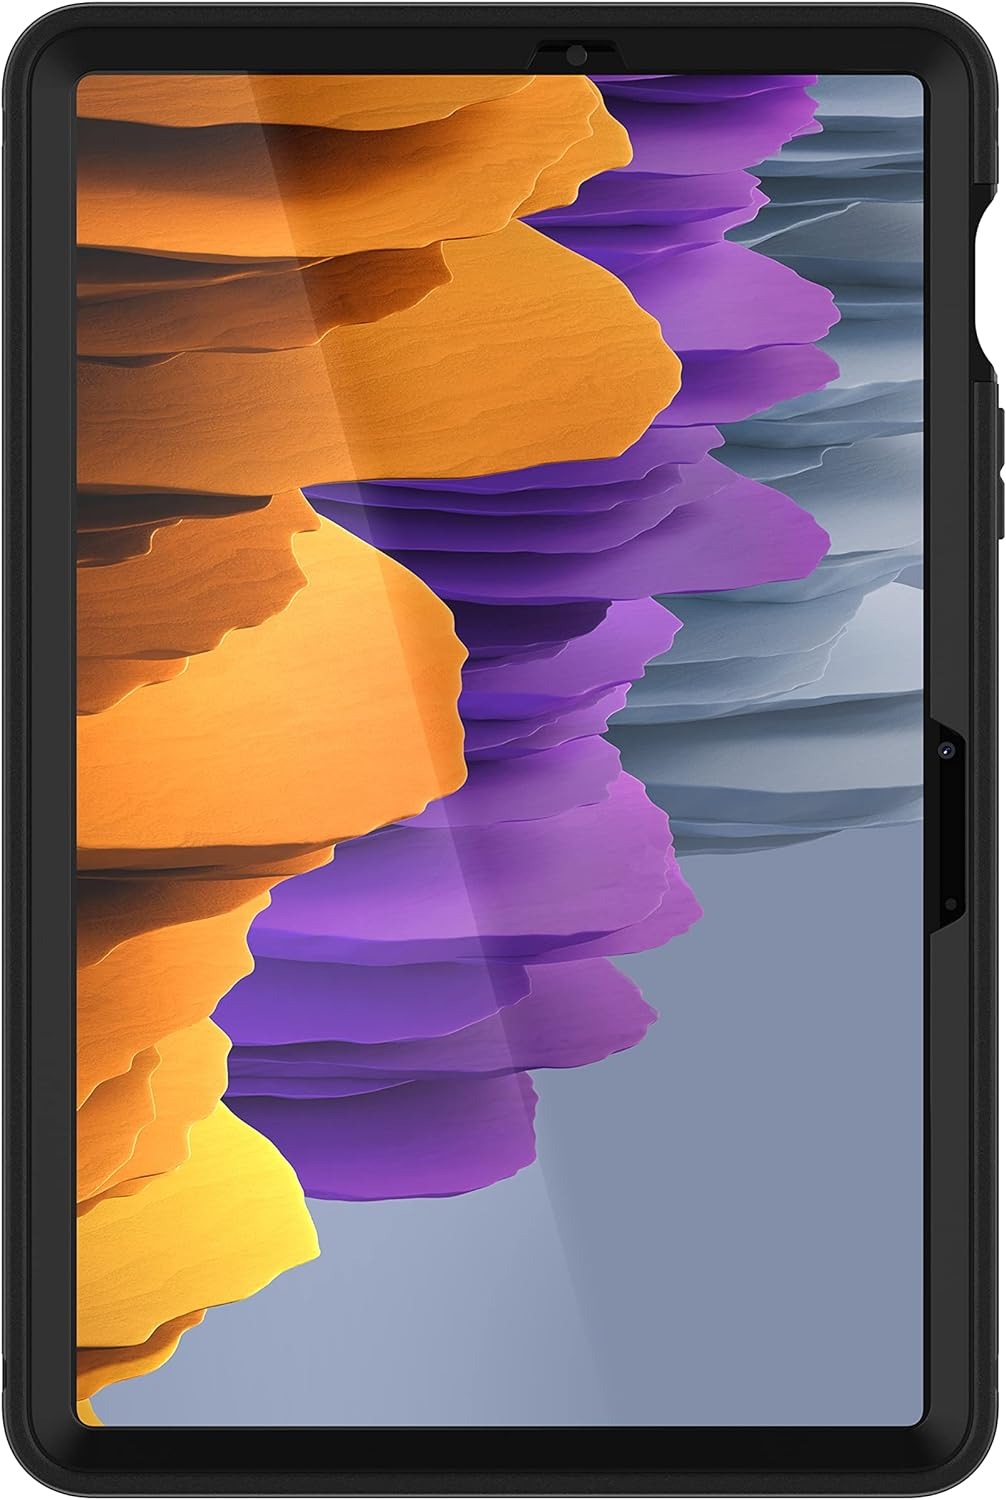 OtterBox DEFENDER SERIES Case for Samsung Galaxy Tab S7 - Black (Certified Refurbished)